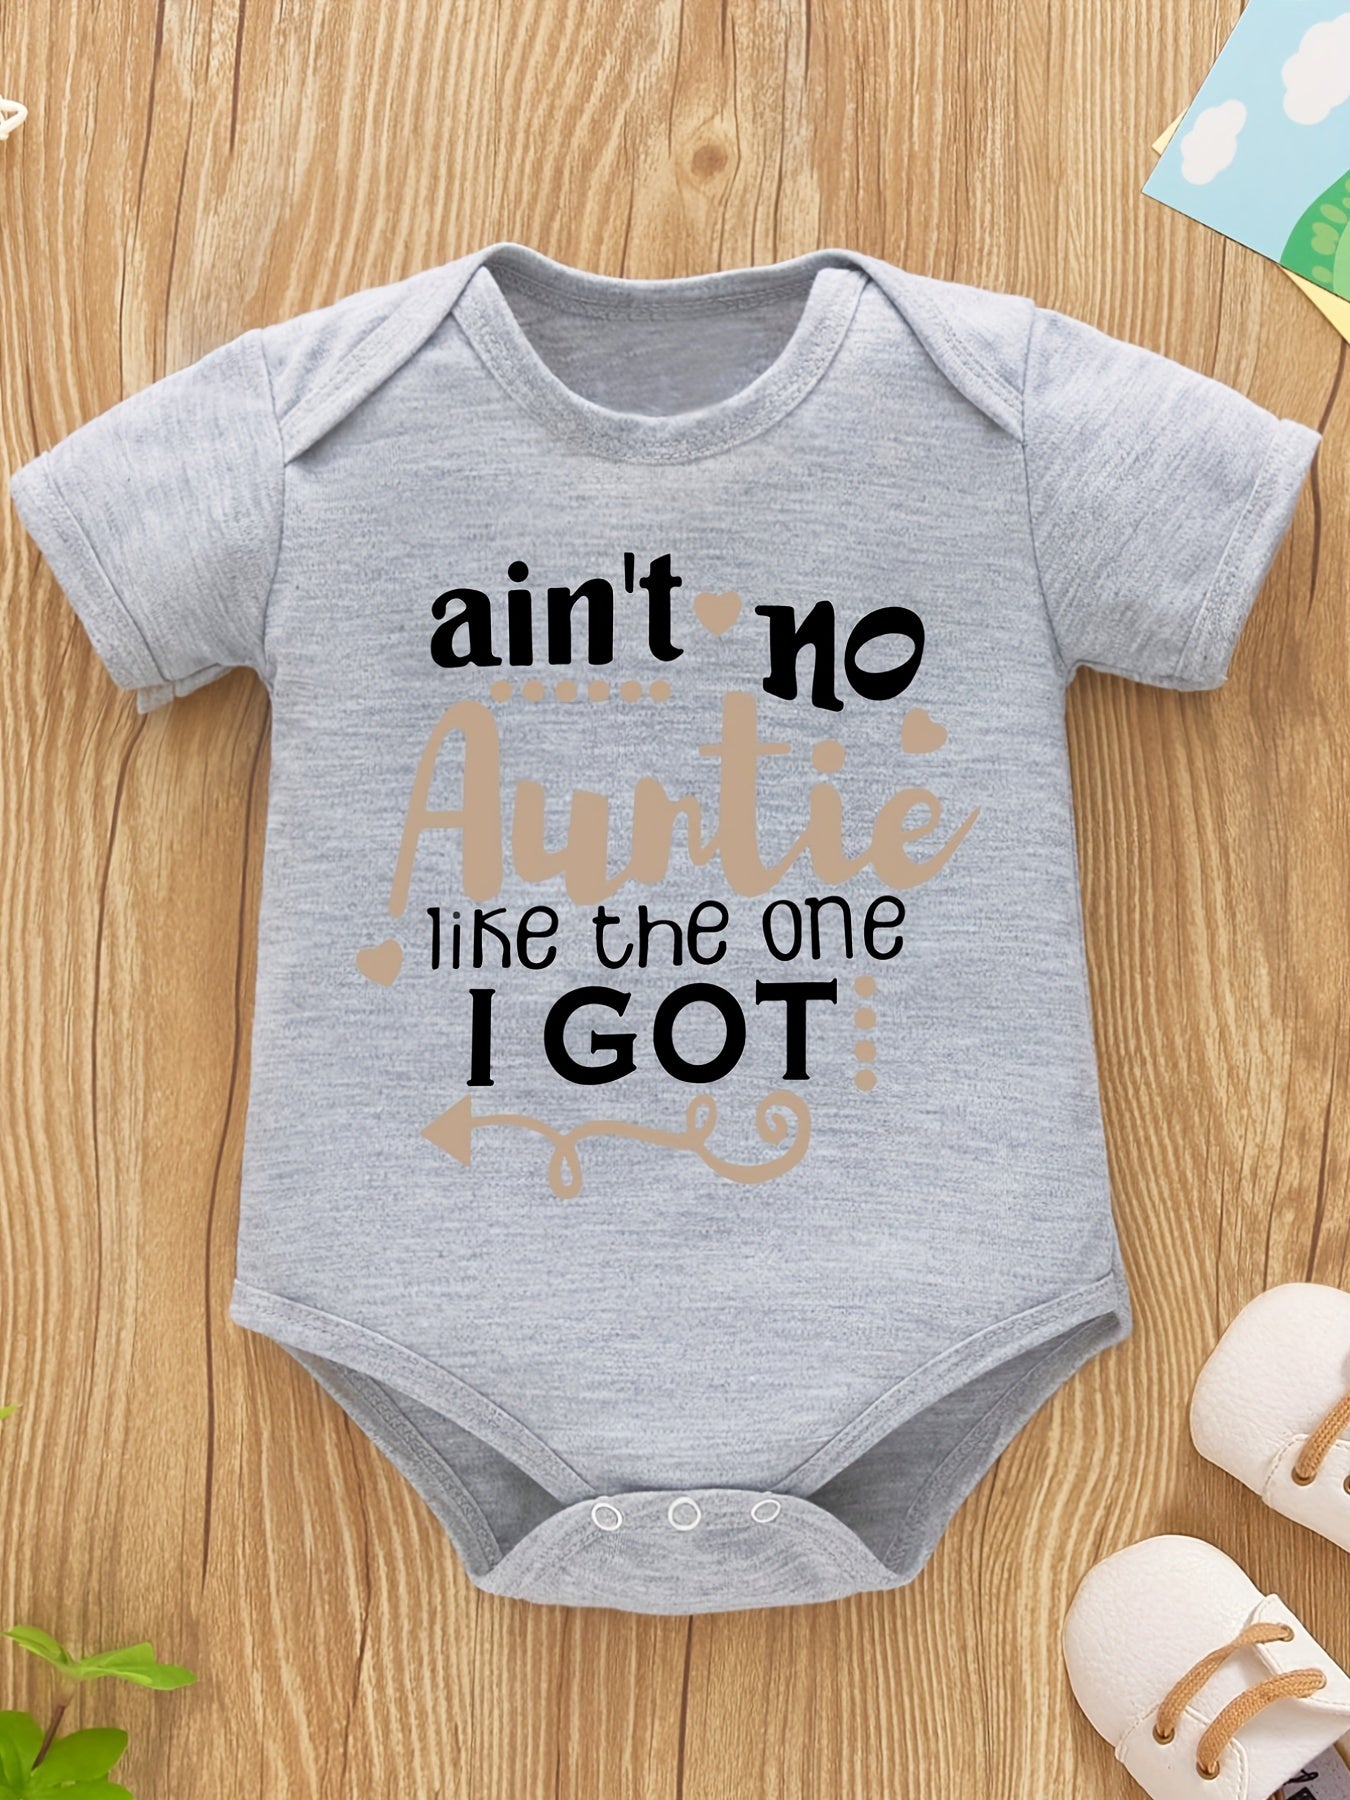 Adorable Baby Romper - Humorous Letter Print Short Sleeve Onesie - Perfect Summer Outfit for Newborns & Toddlers